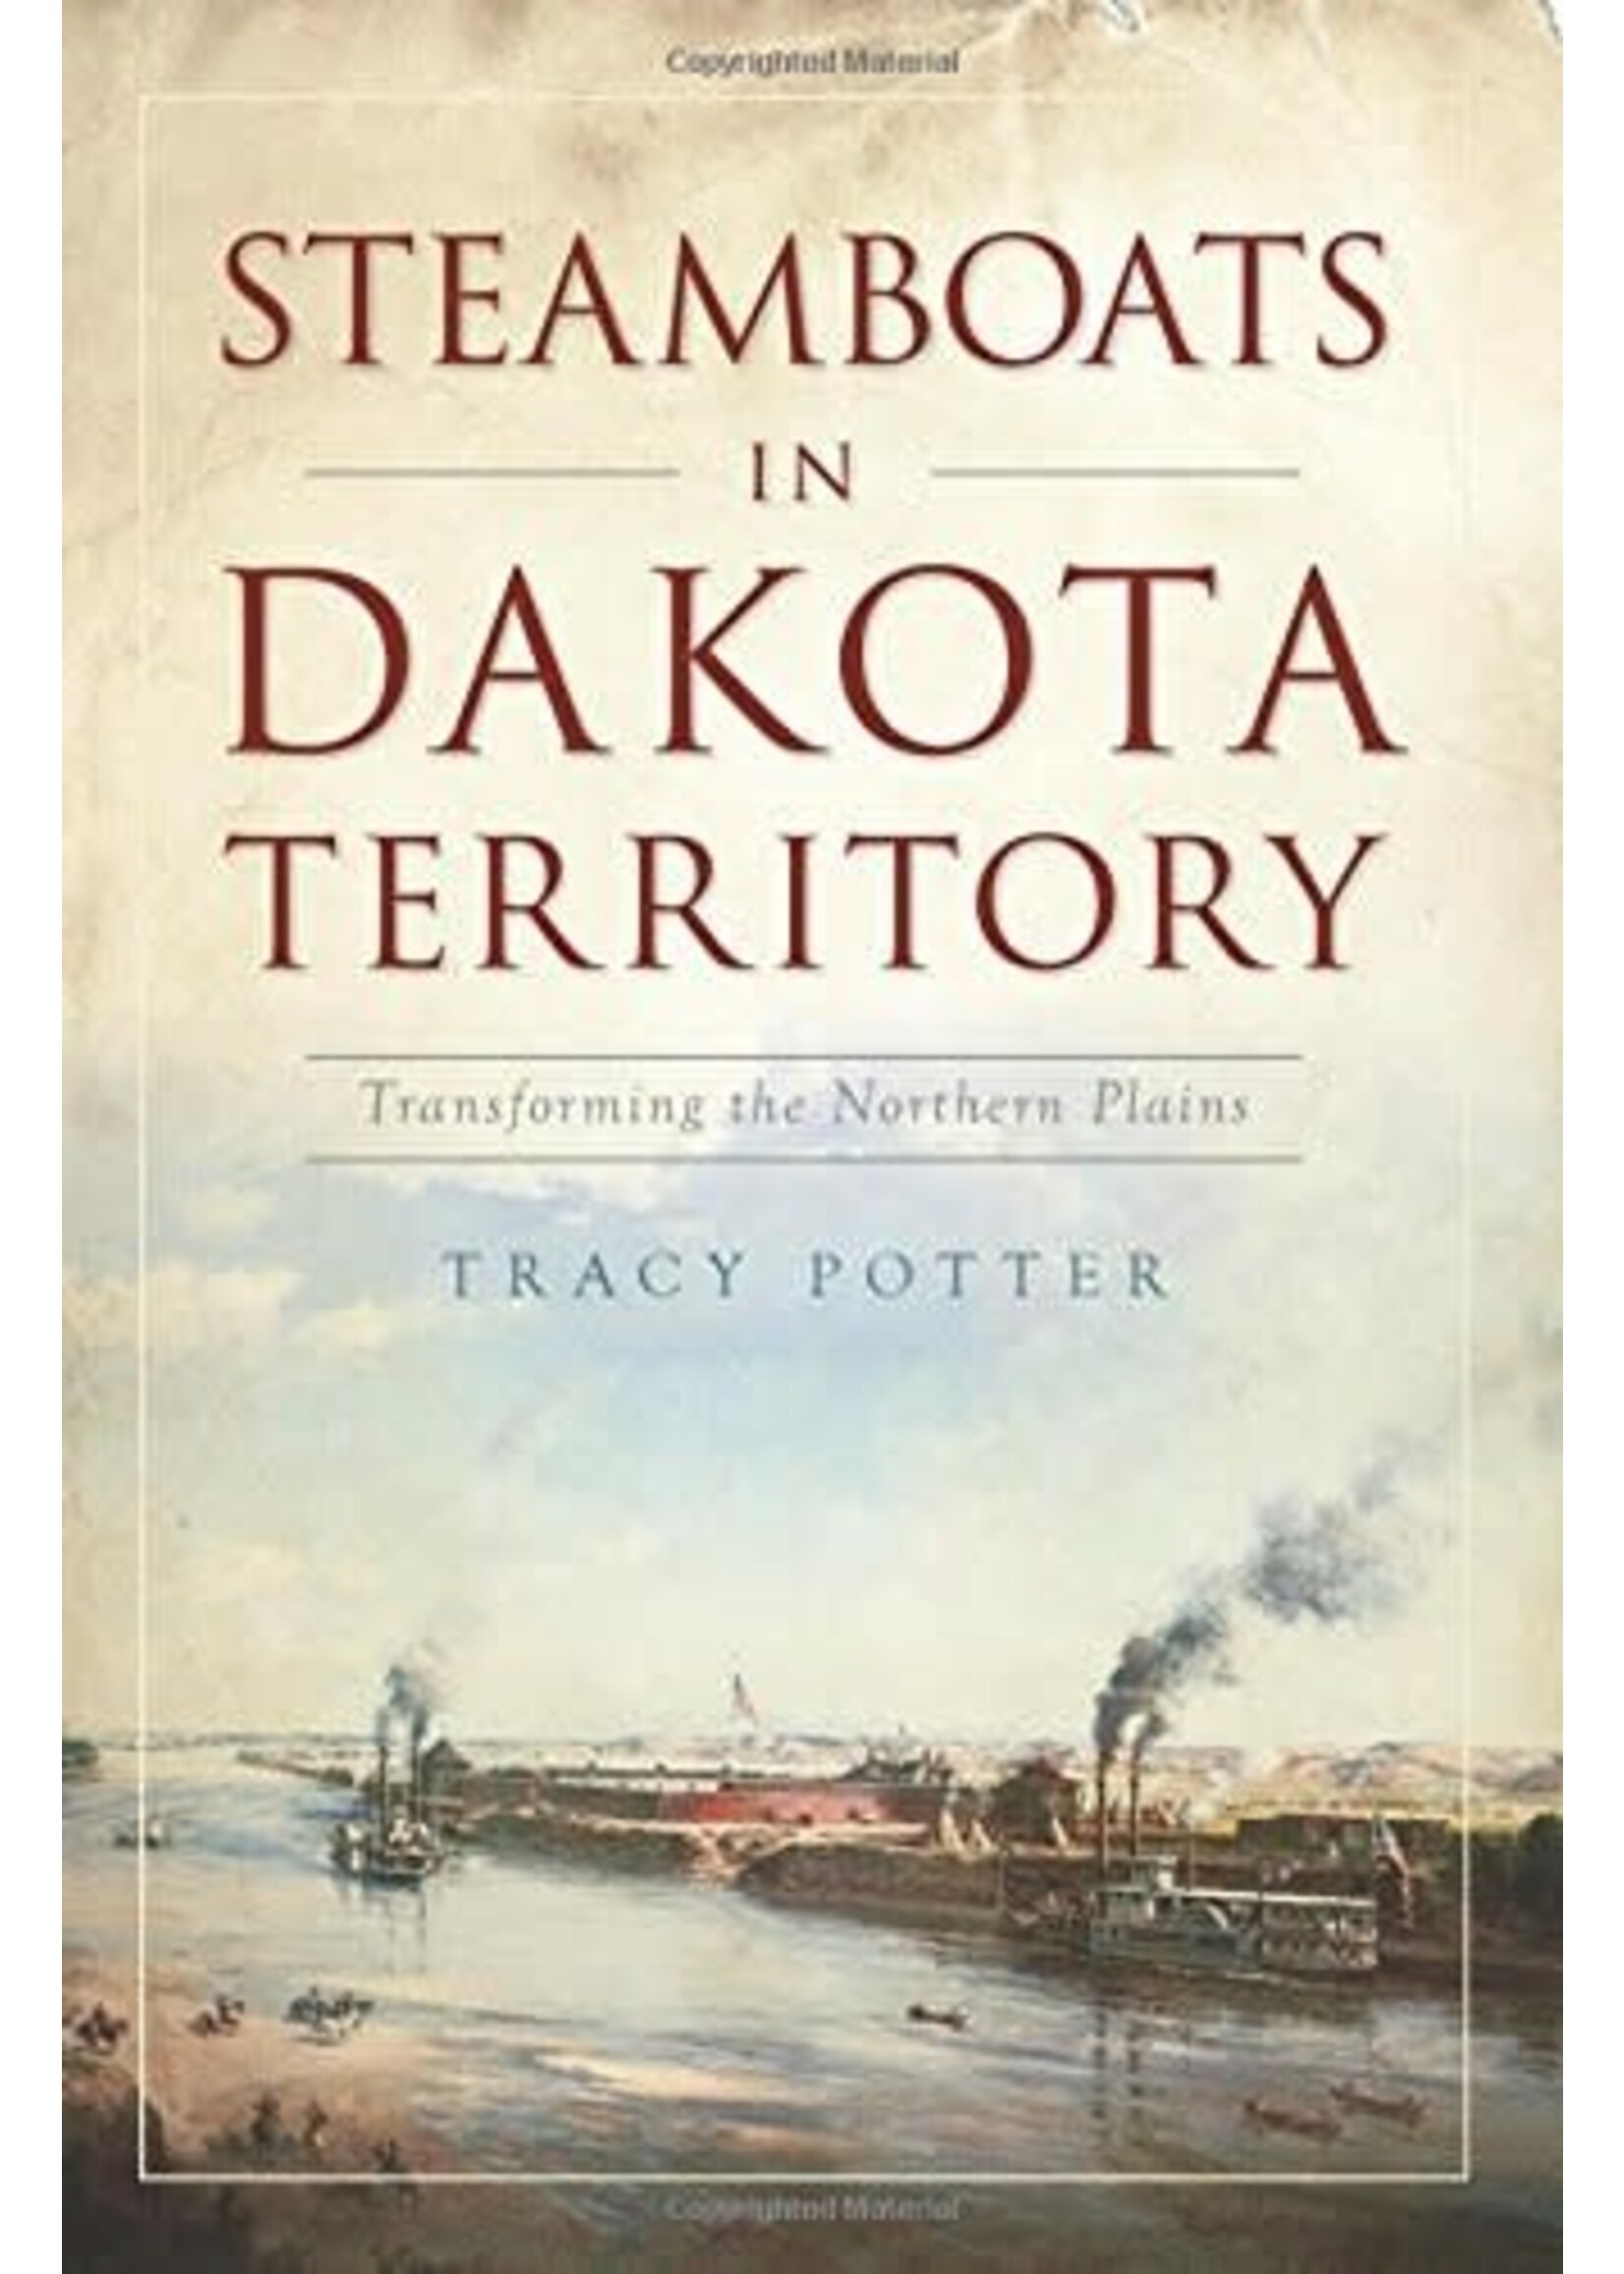 Steamboats In Dakota Territory: Transforming the Northern Plains